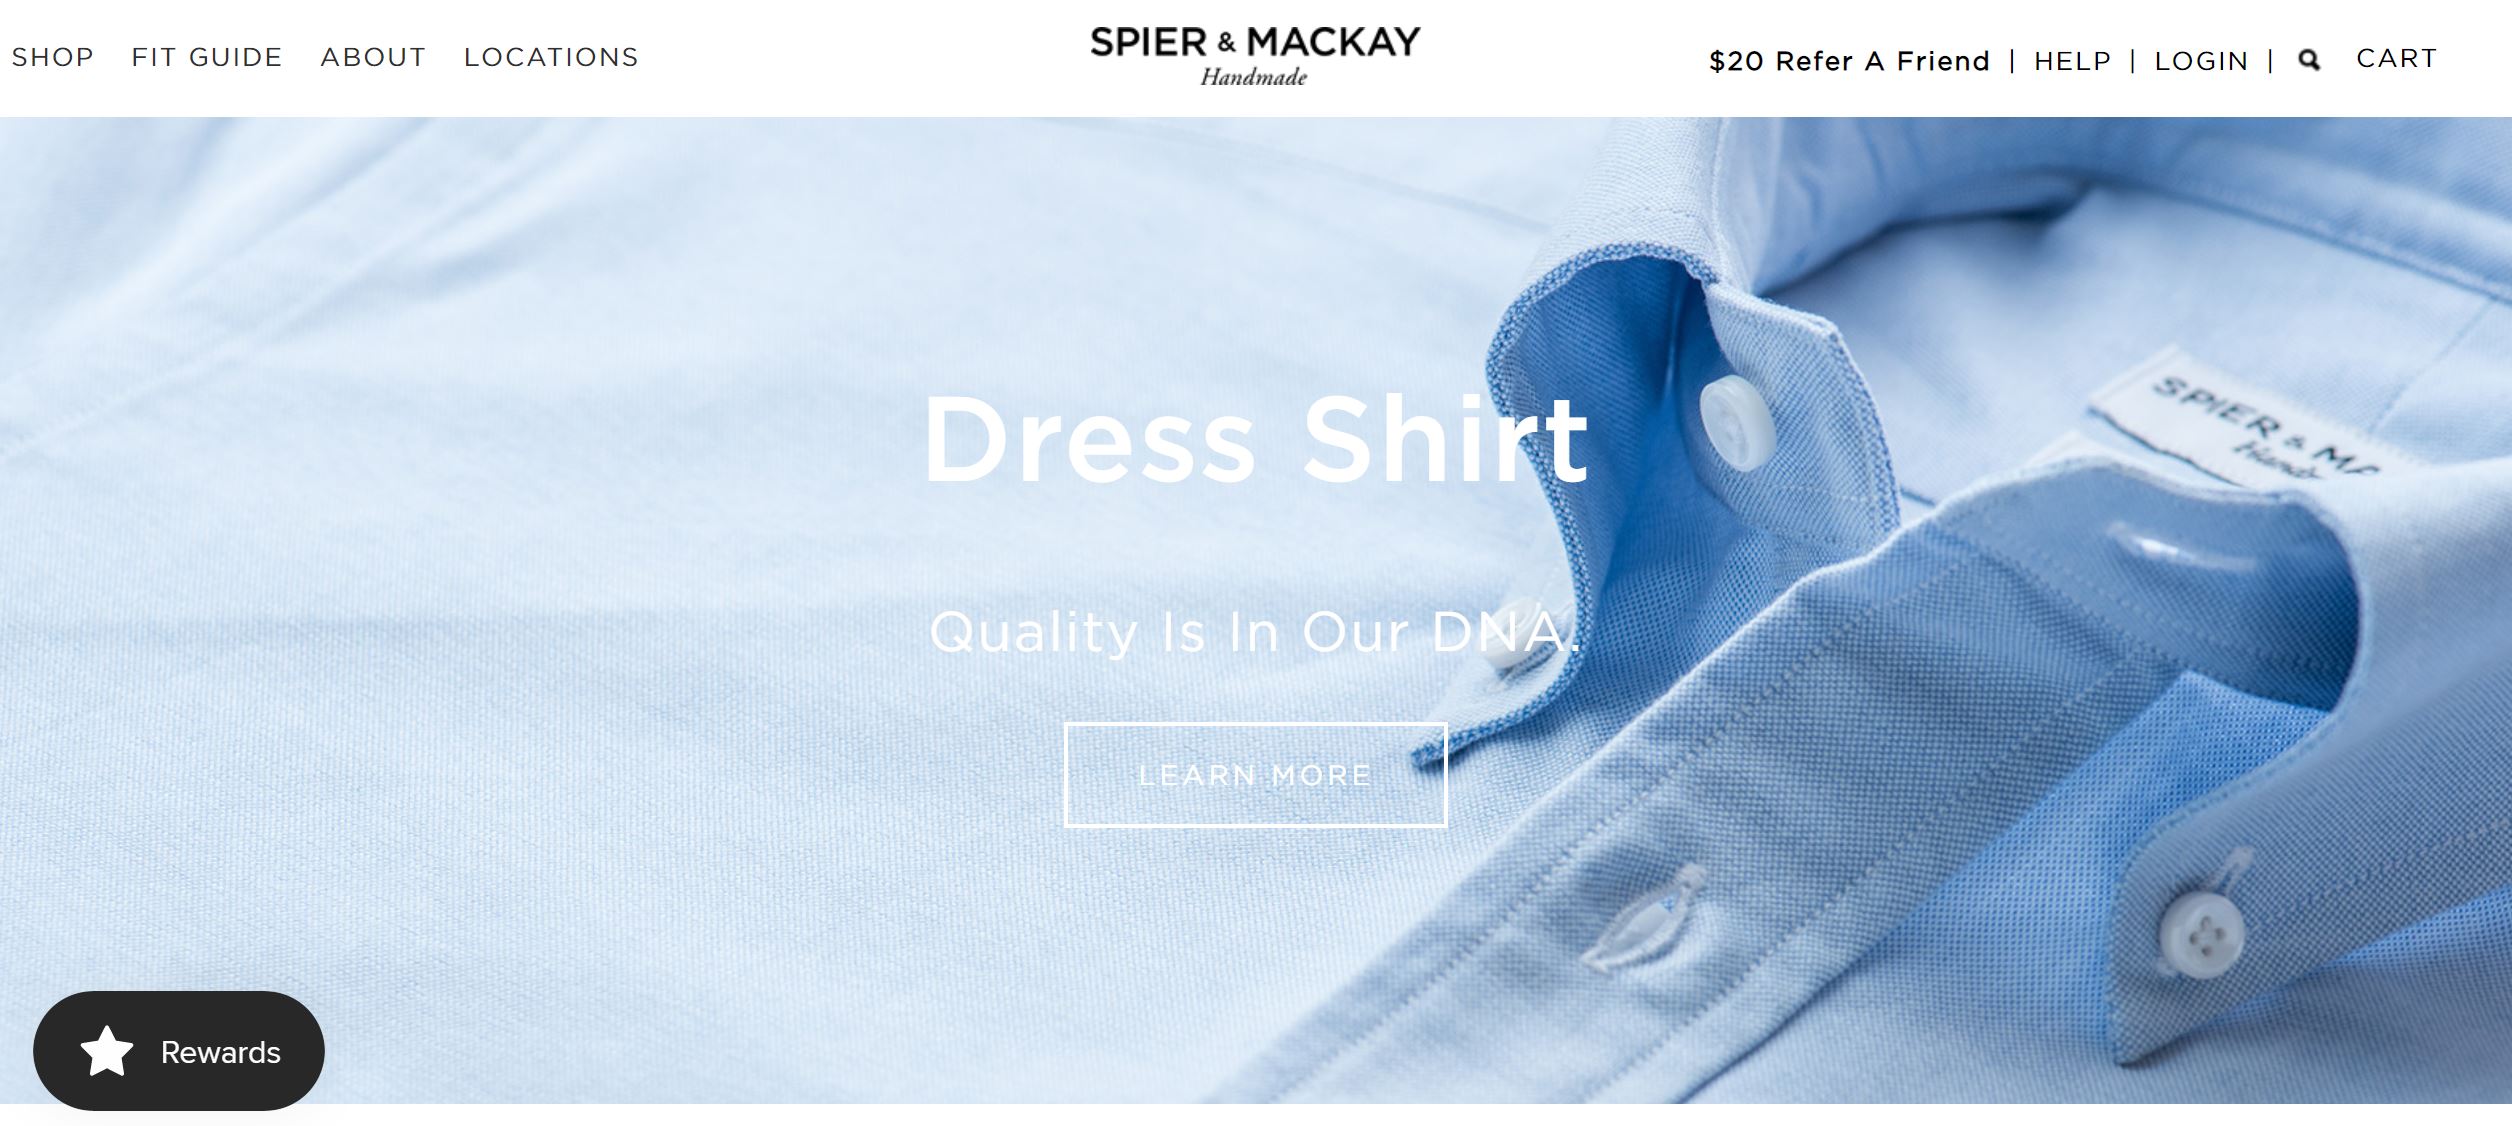 Spier and Mackay Company Profile - Website